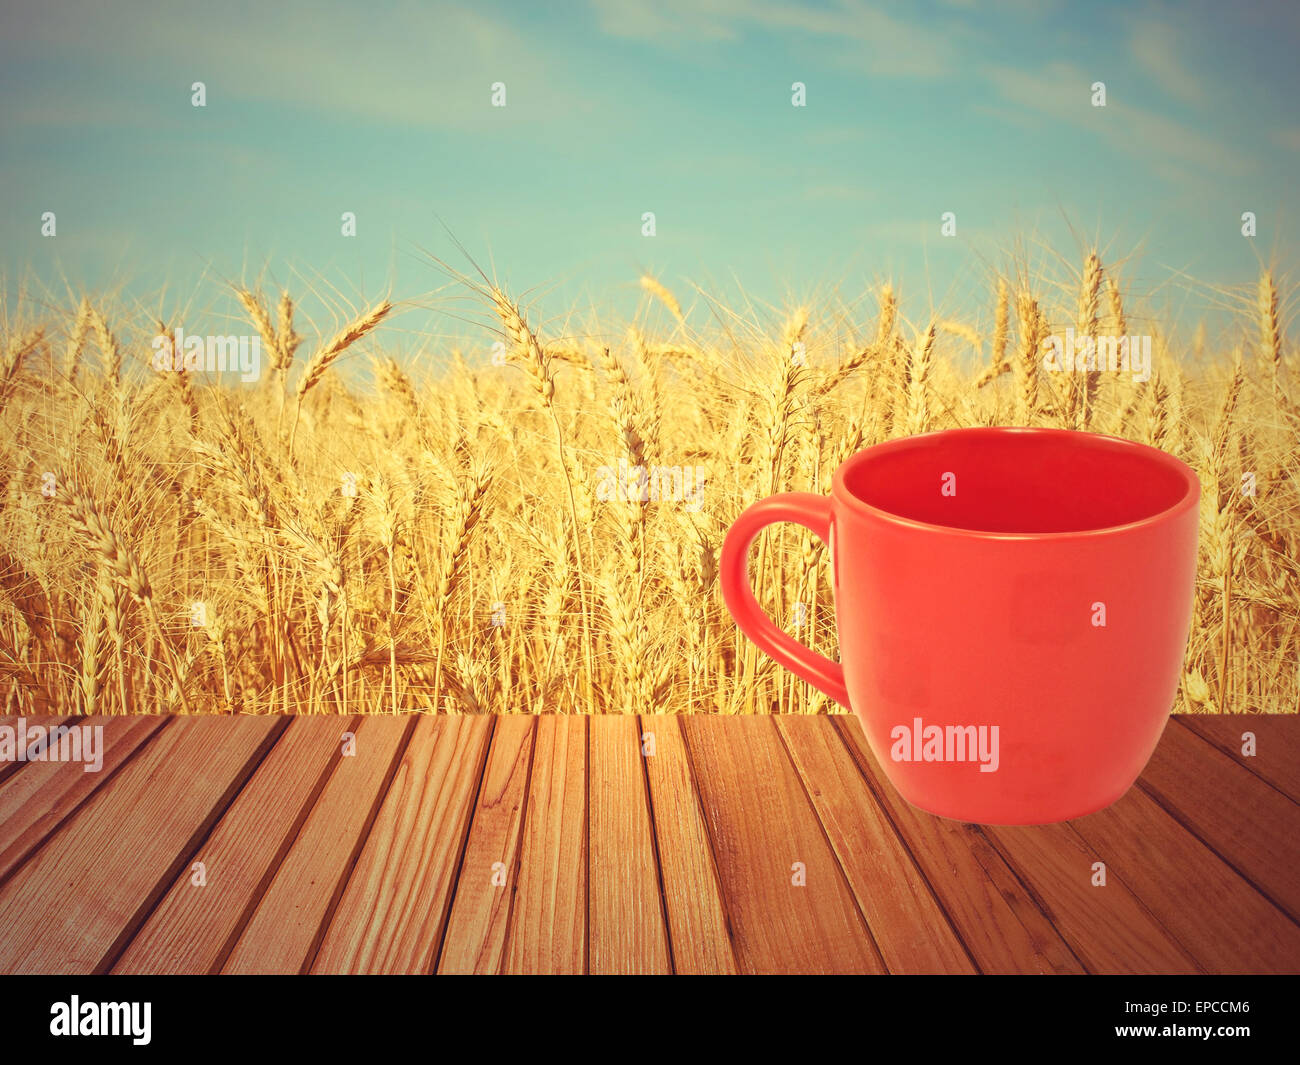 Red tea mug on wooden surface against of golden wheat ears and blue sky. Stock Photo